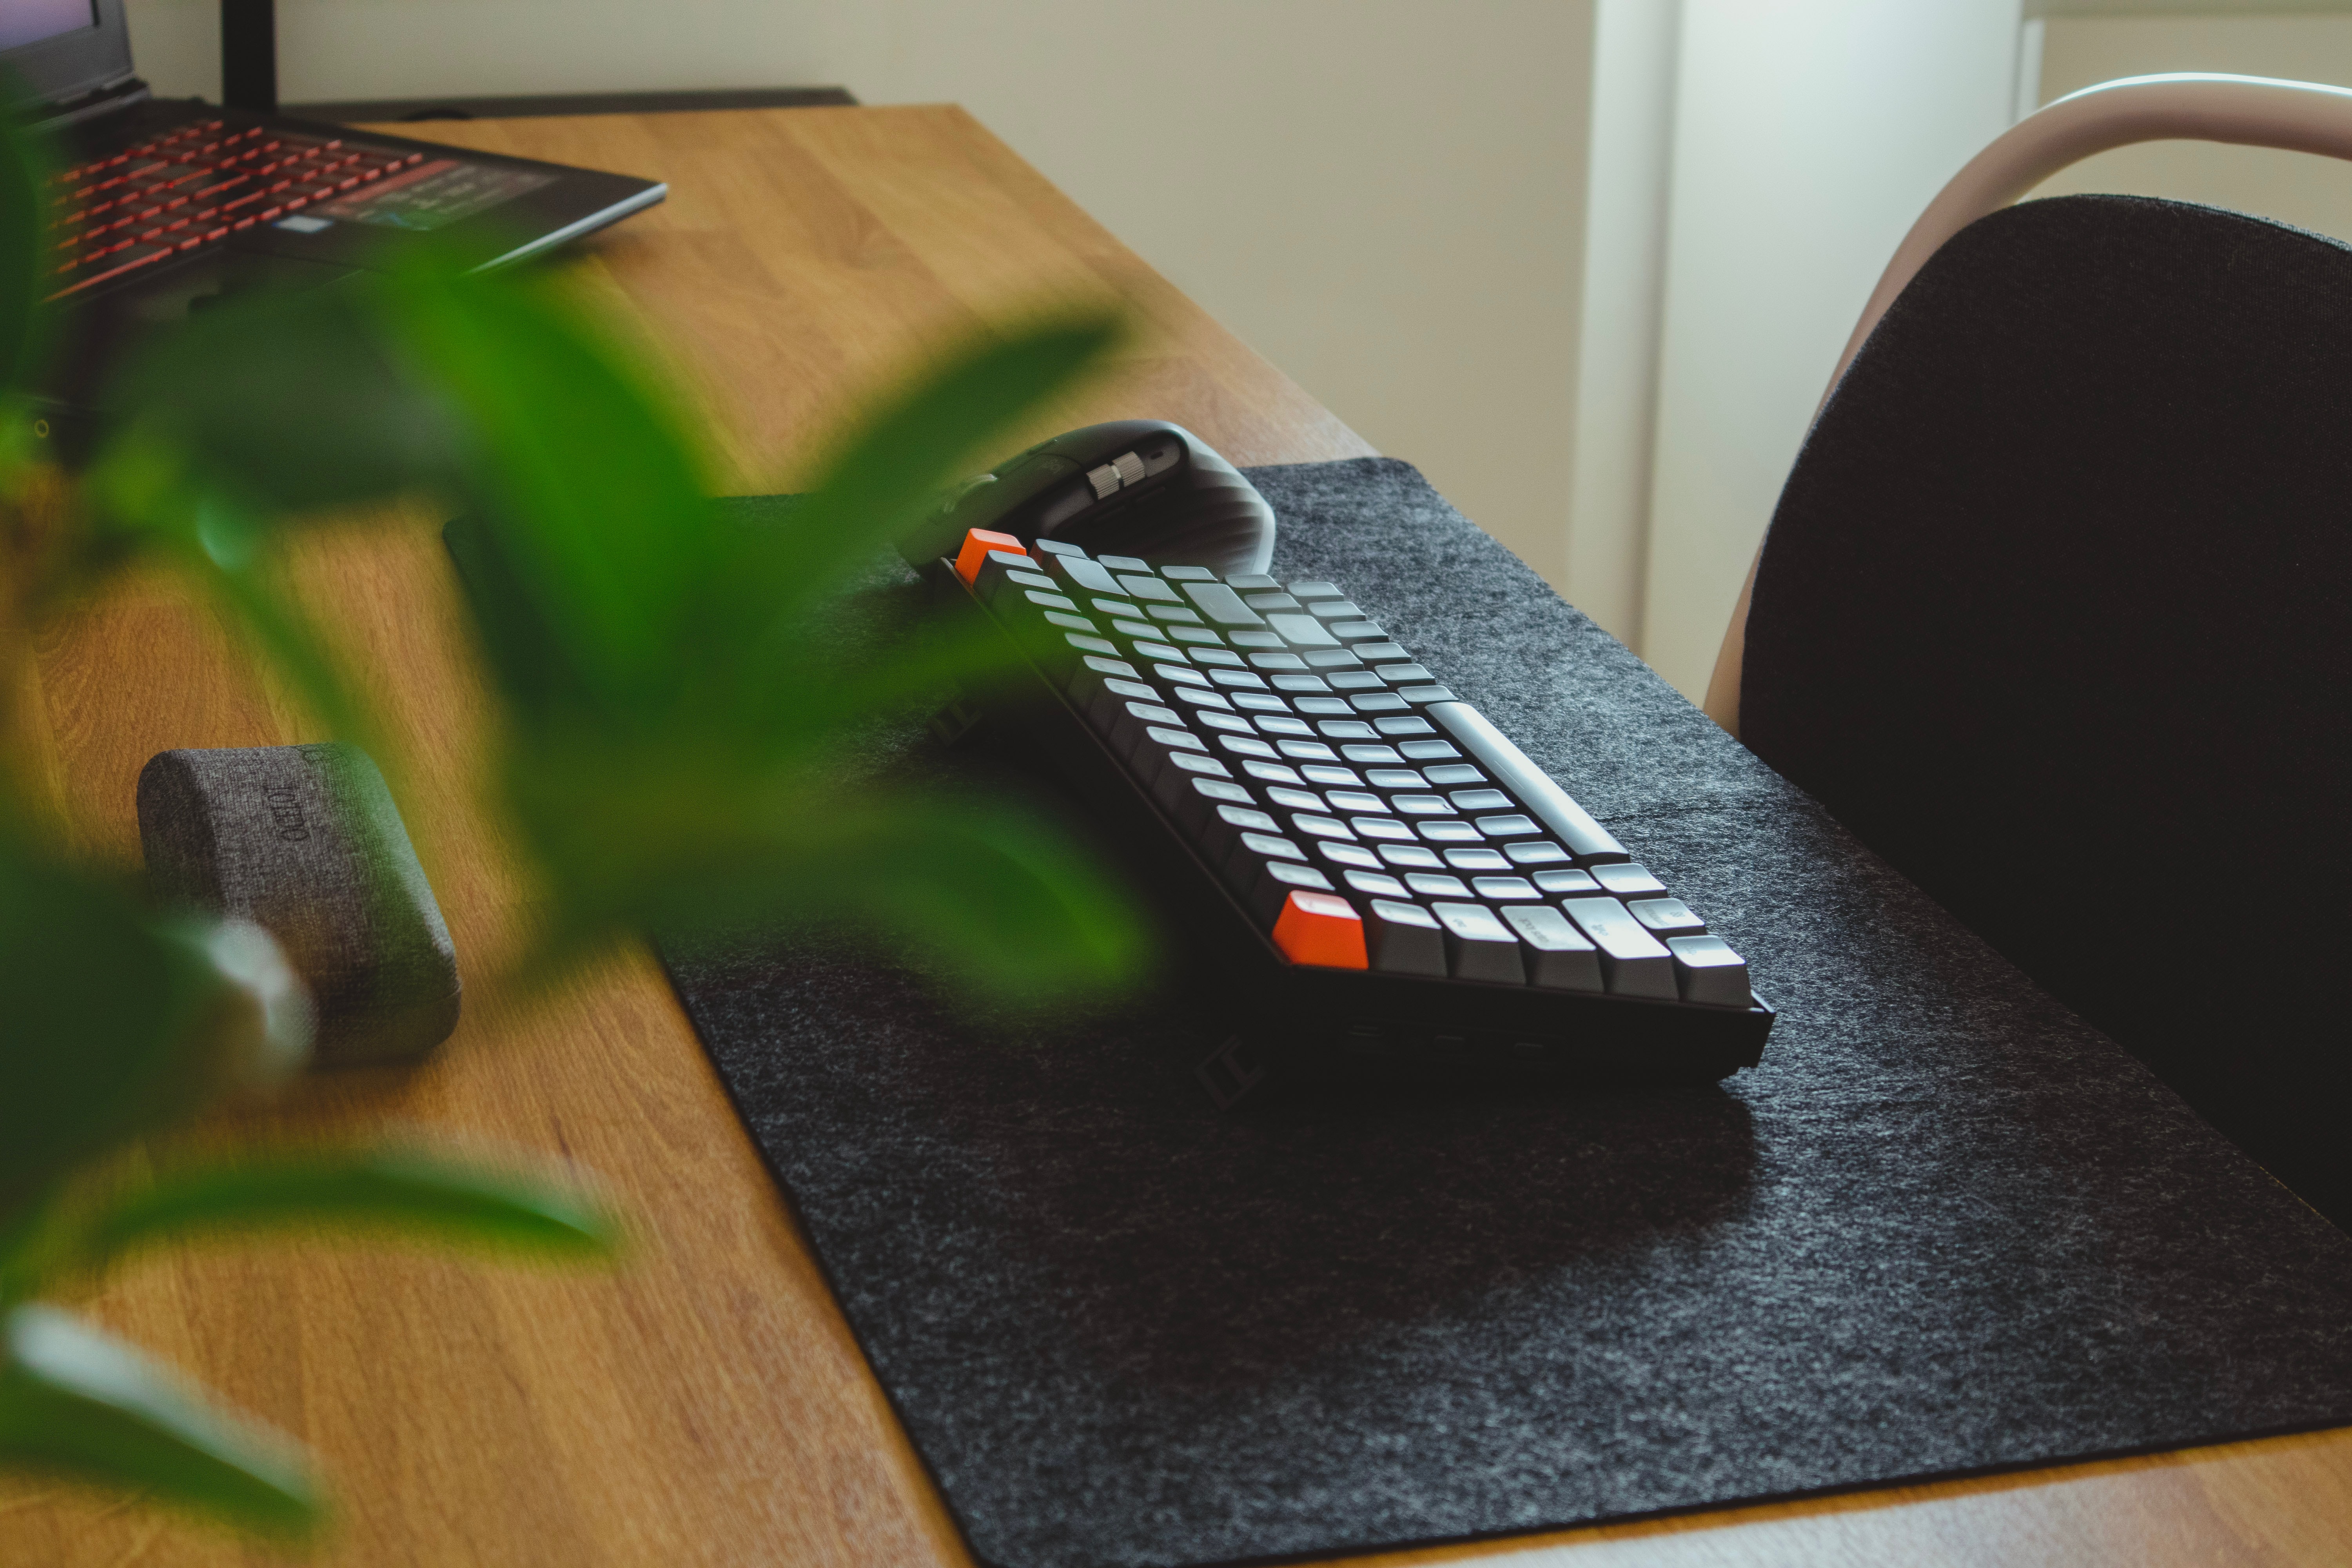 A mechanical keyboard lies on a desk surrounded by plants